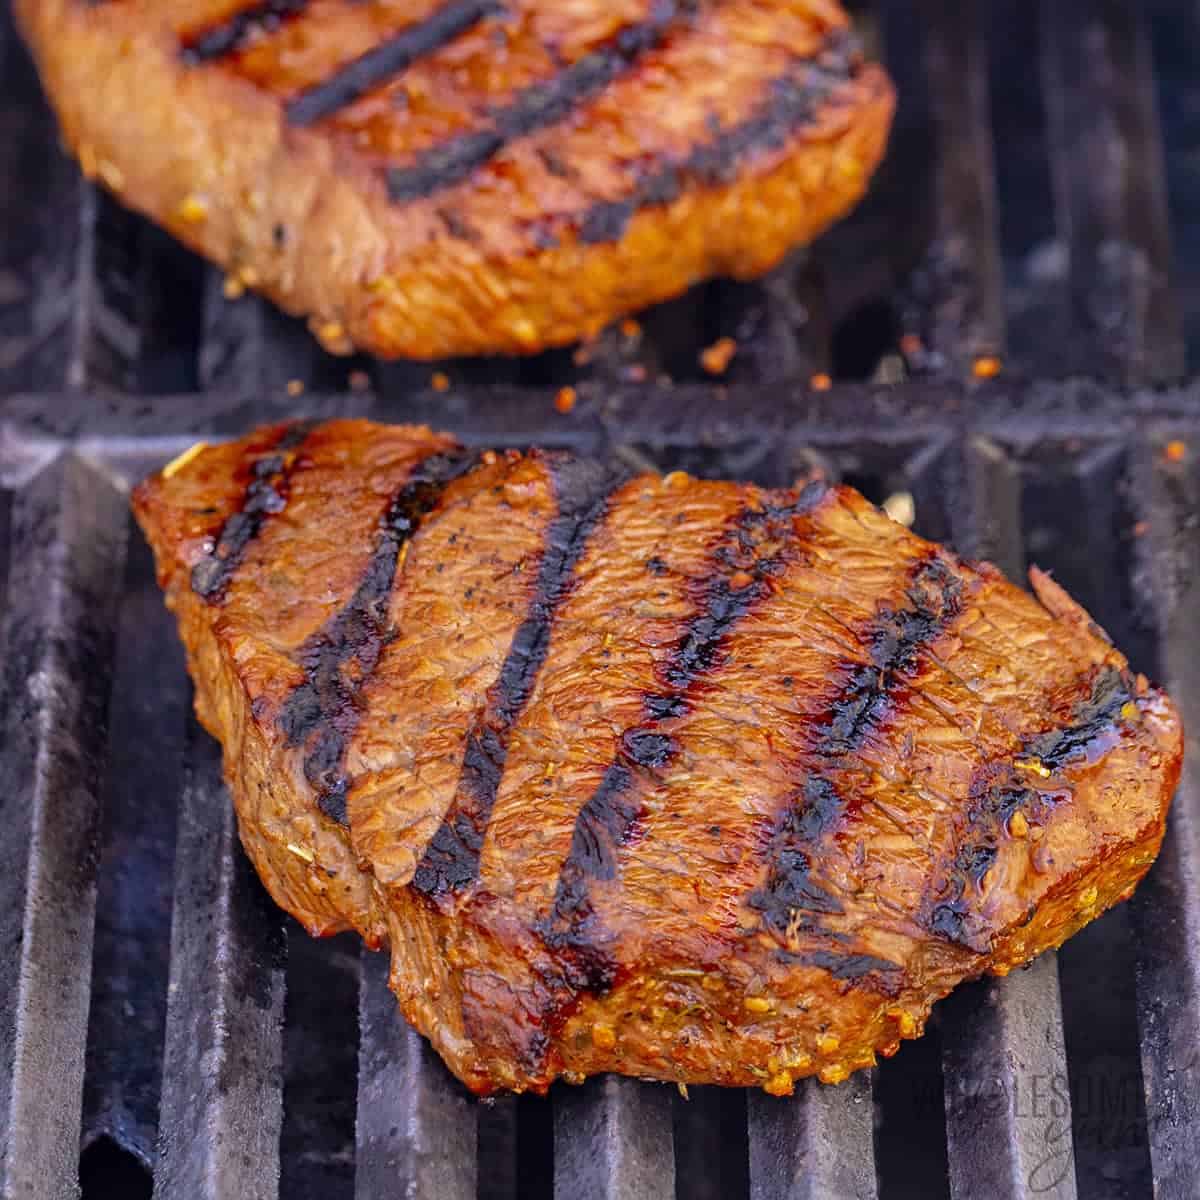 Seared steaks on grill grates.